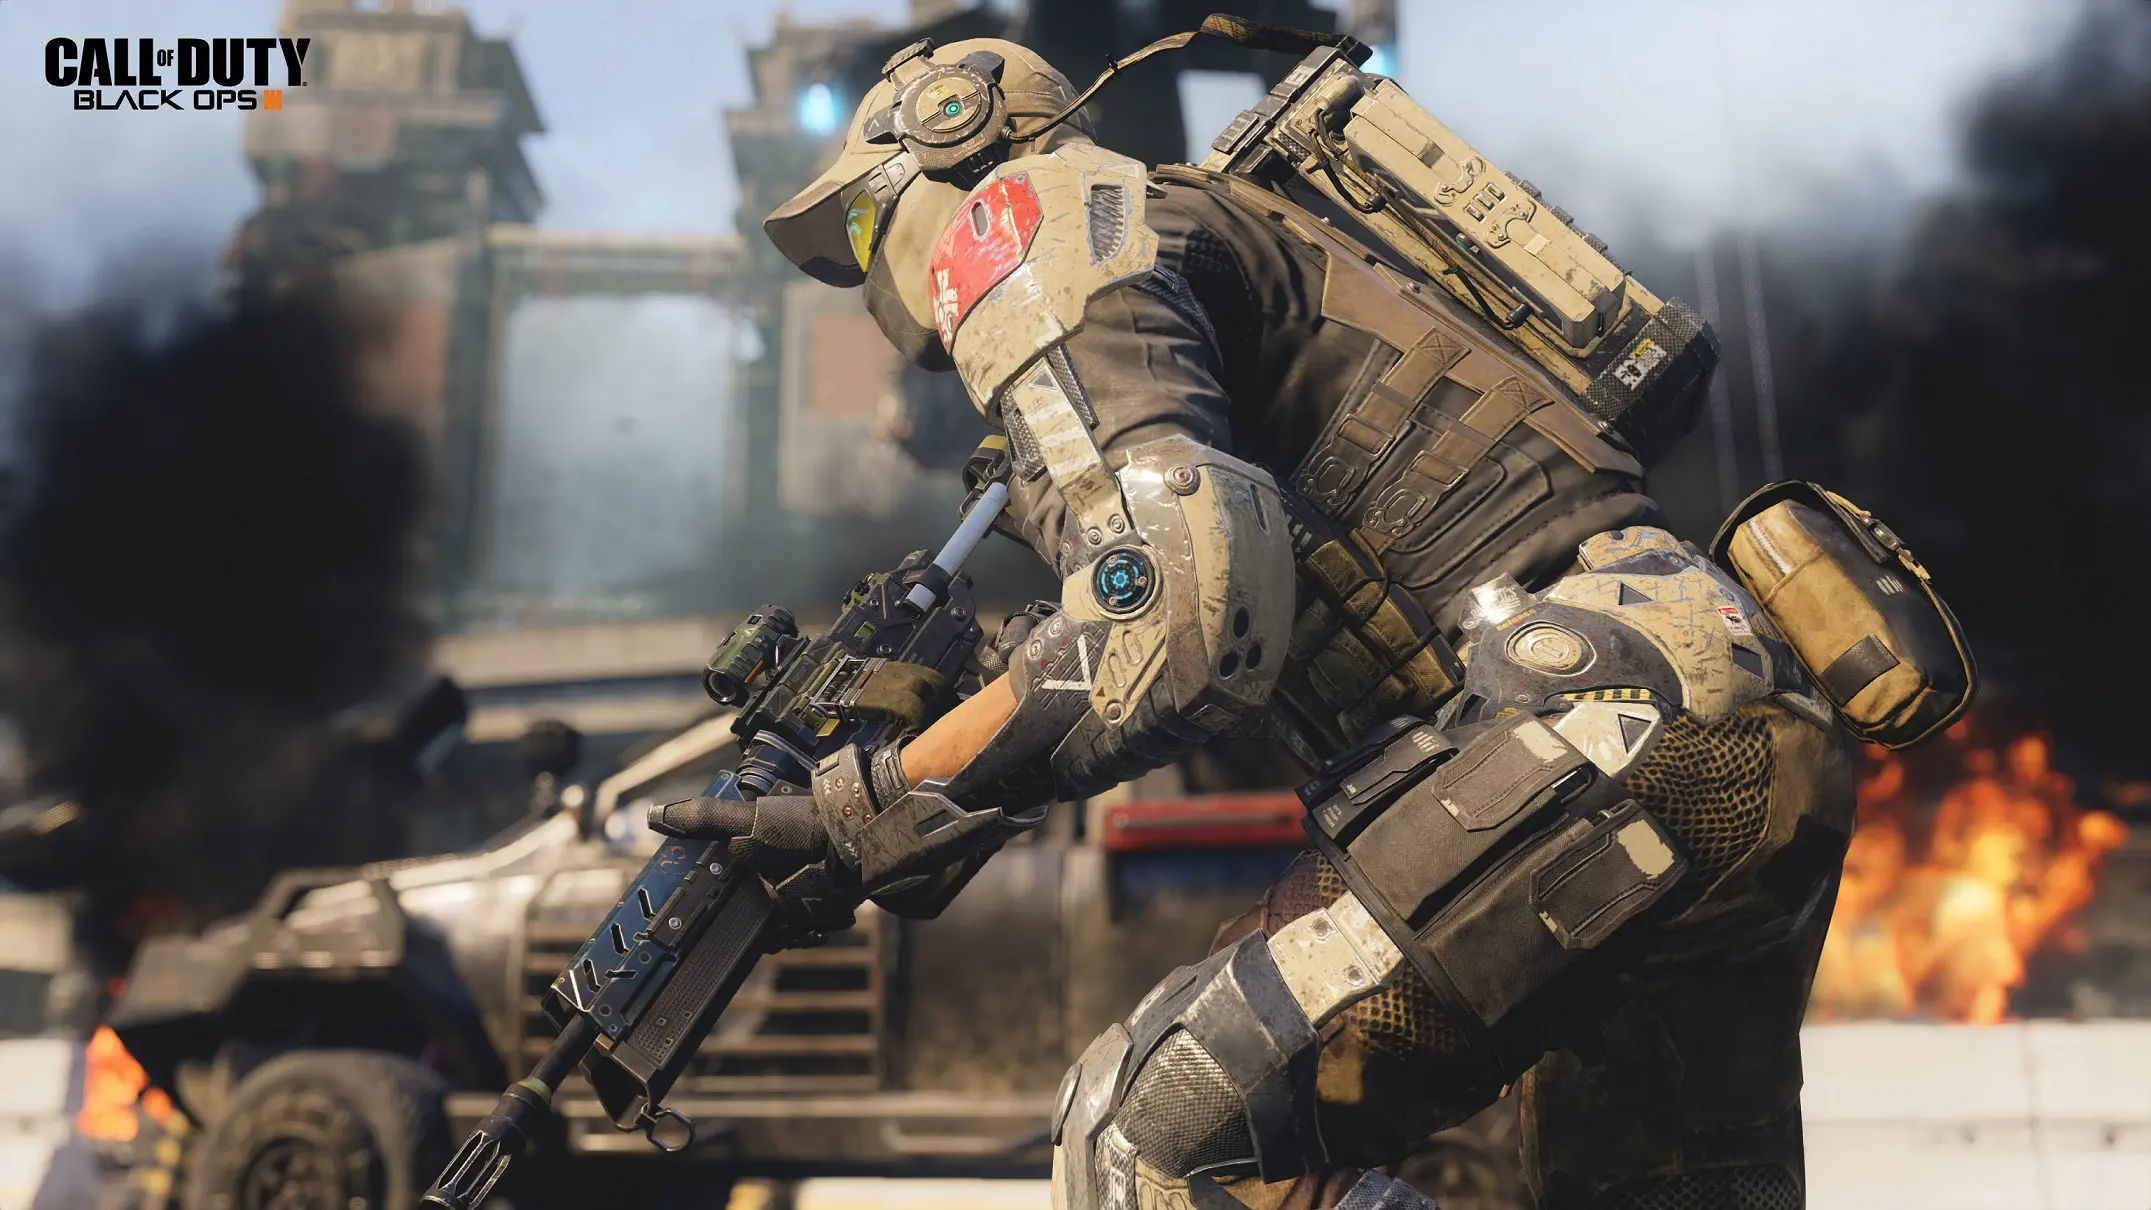 Wallpaper hd: Call of Duty Black Ops 3 - download free in 4K, wallpaper Game